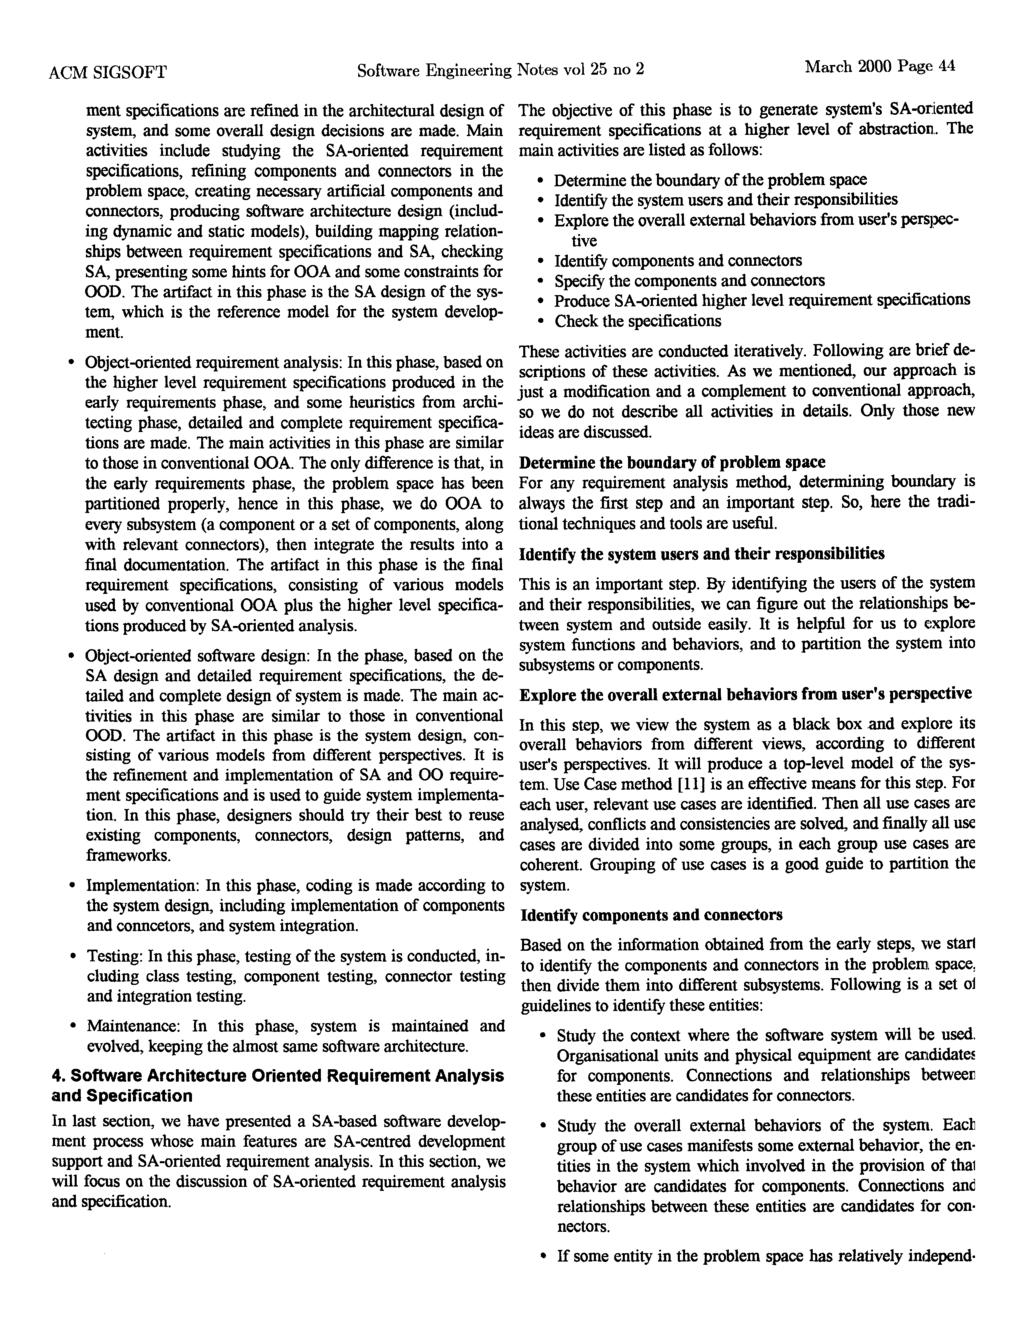 ACM SIGSOFT Software Engineering Notes vol 25 no 2 March 2000 Page 44 merit specifications are refined in the architectural design of system, and some overall design decisions are made.